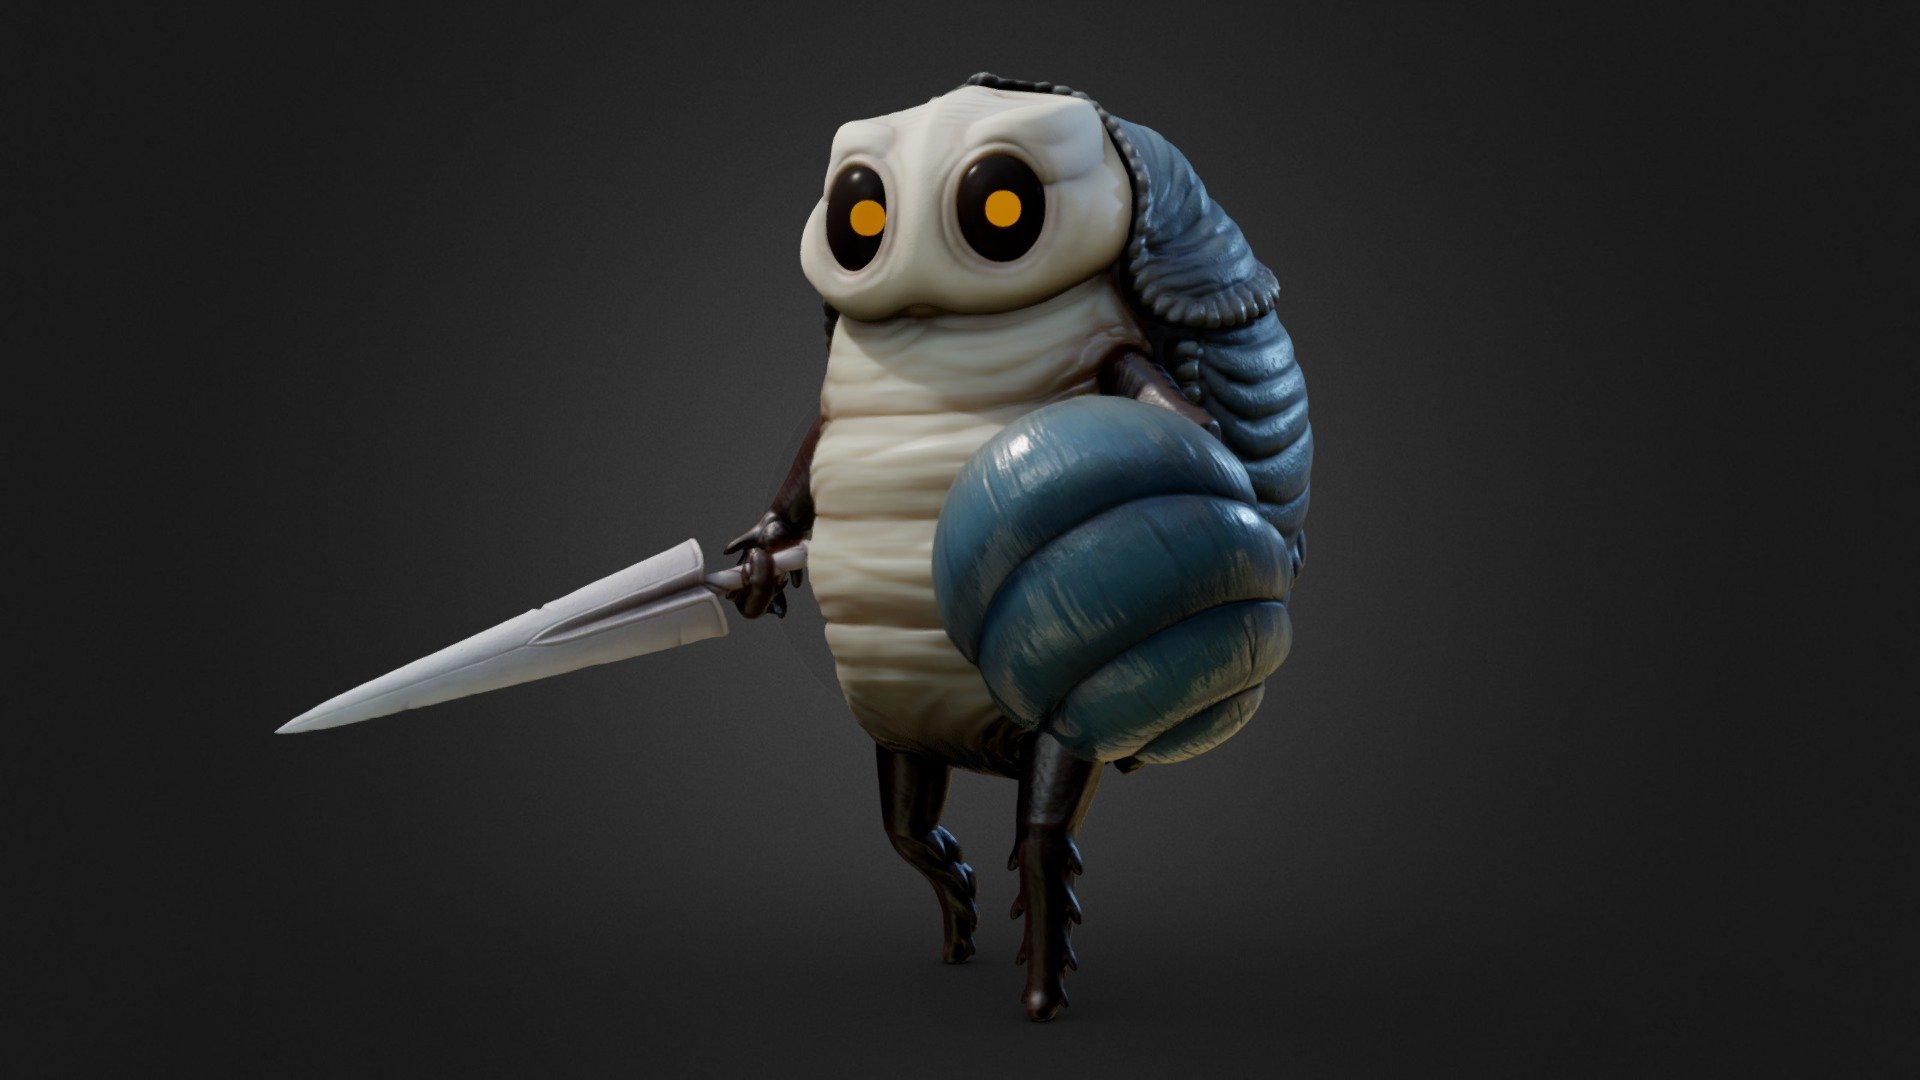 Fan art of the Husk Warrior from Hollow Knight, one of the first enemies from the game.

Sculpted in Blender and textured with Substance Painter 3d model